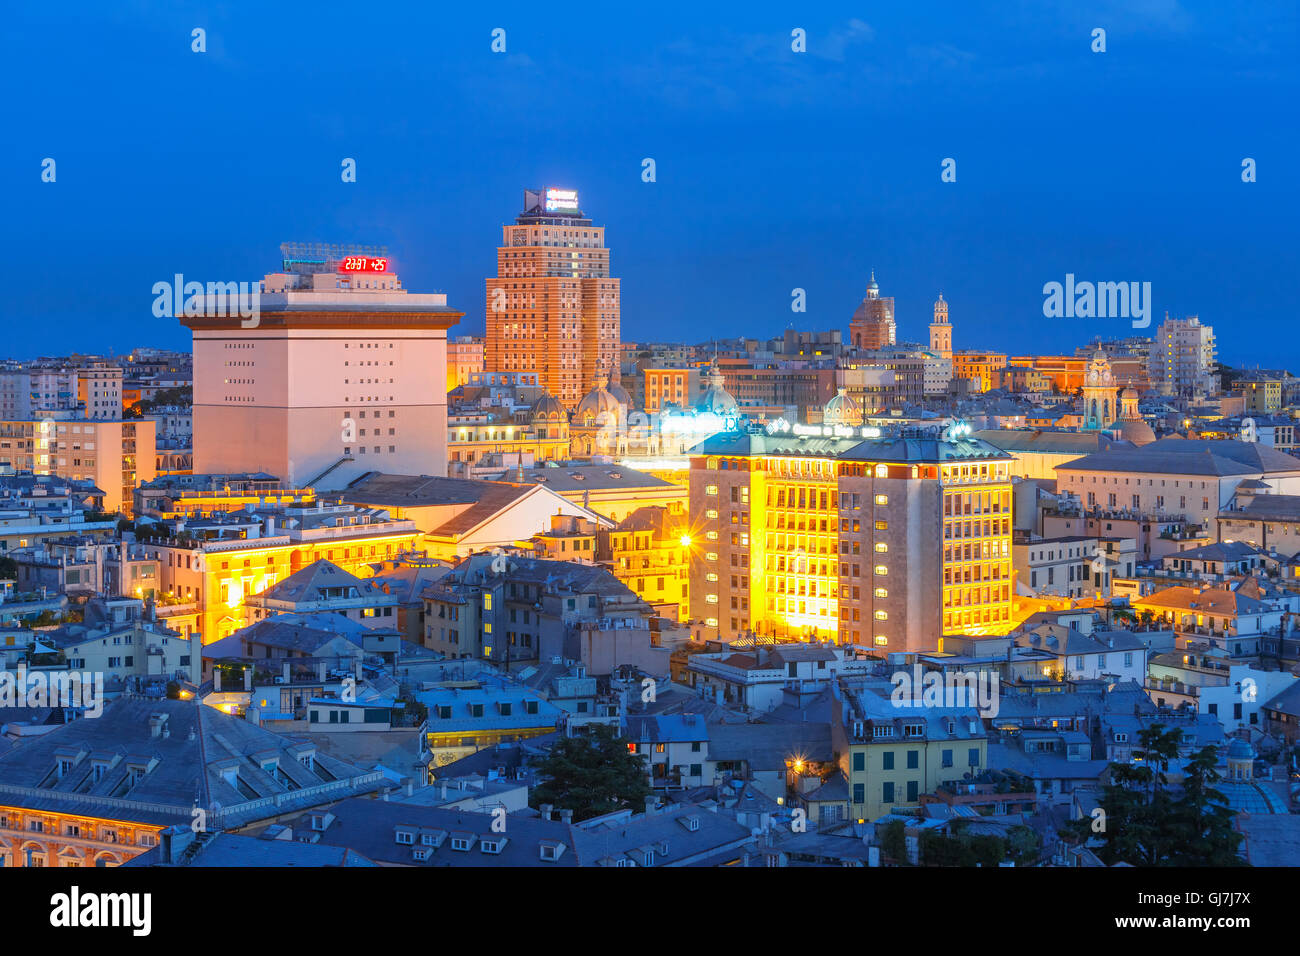 Old town and port of Genoa at night, Italy. Stock Photo